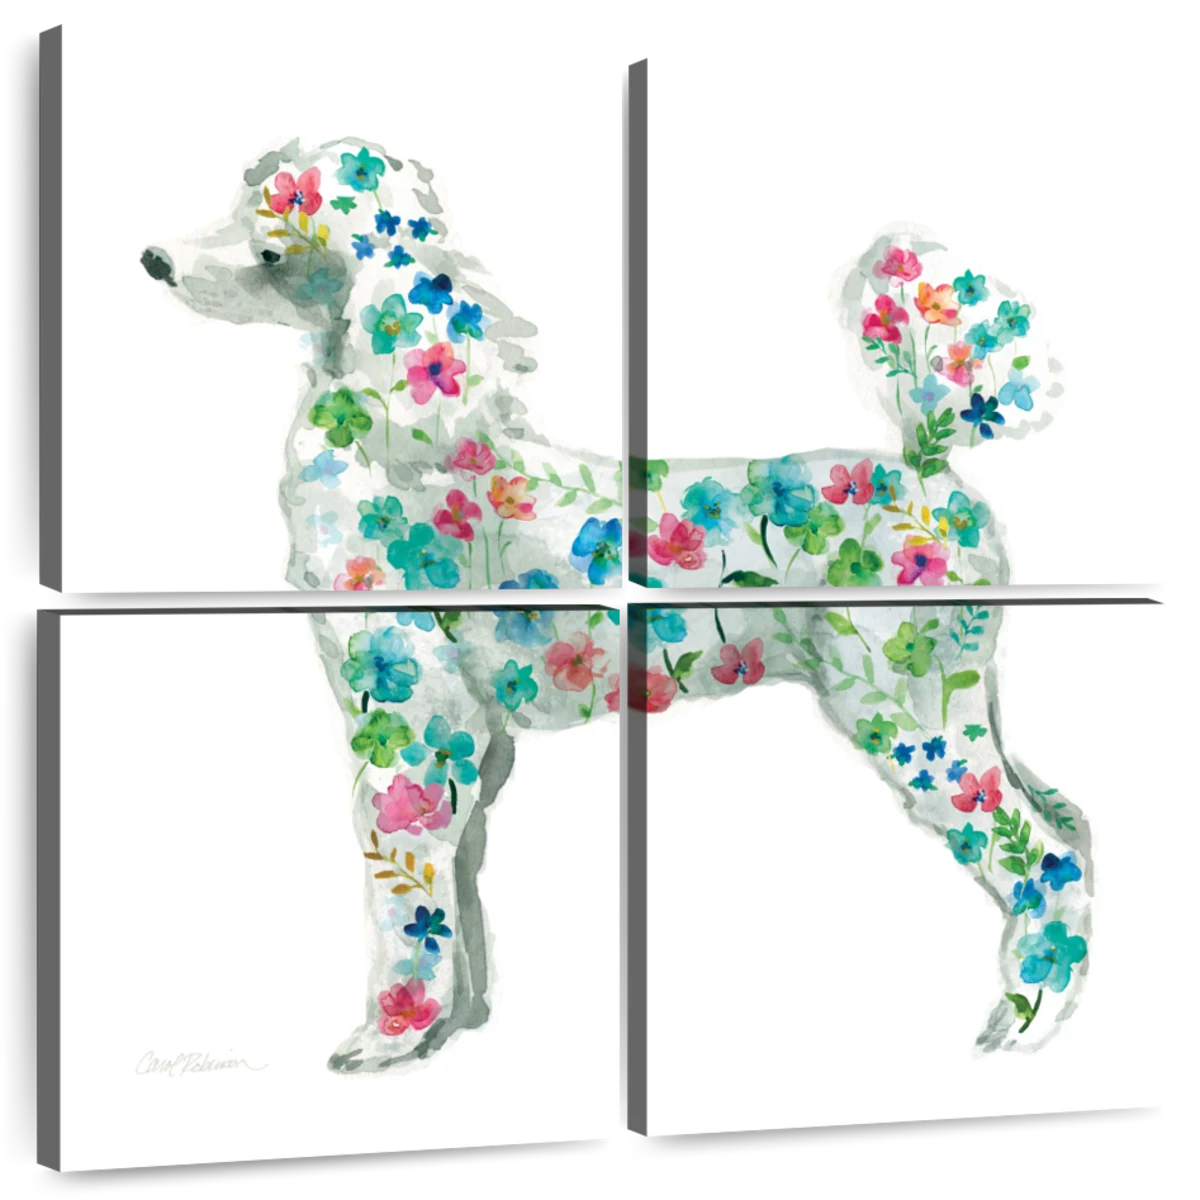 Stupell Hipster Dog Sweater Poodle Funny Animal Painting,10 x 15, Wood Wall  Art - On Sale - Bed Bath & Beyond - 31003611